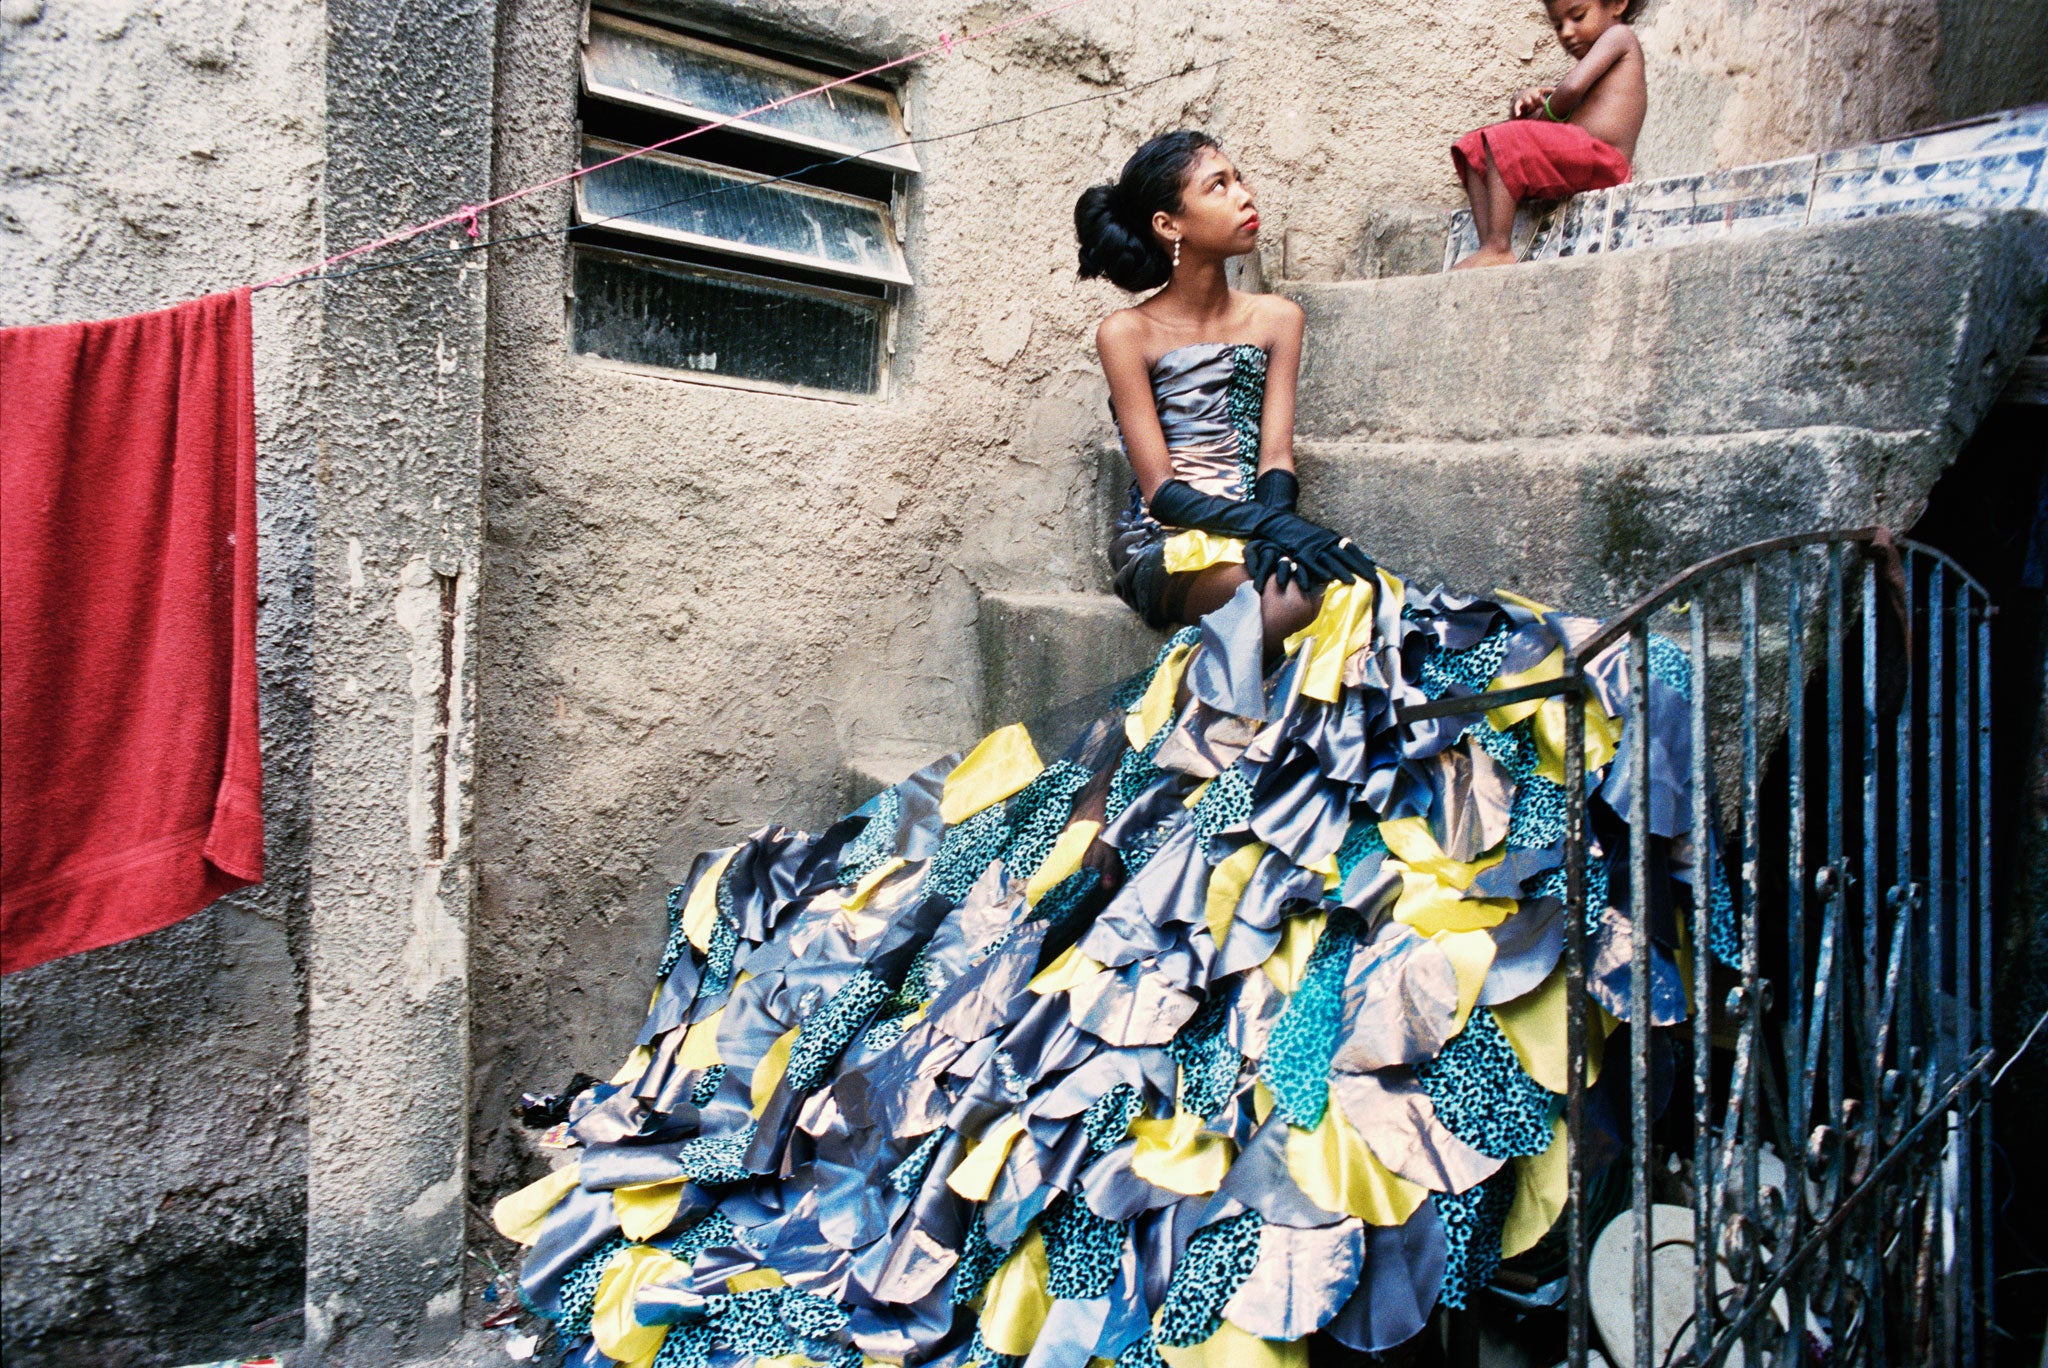 'The Hollywood Star': Milena, 12 years old, photographed in the favela of Rocinha, 2012